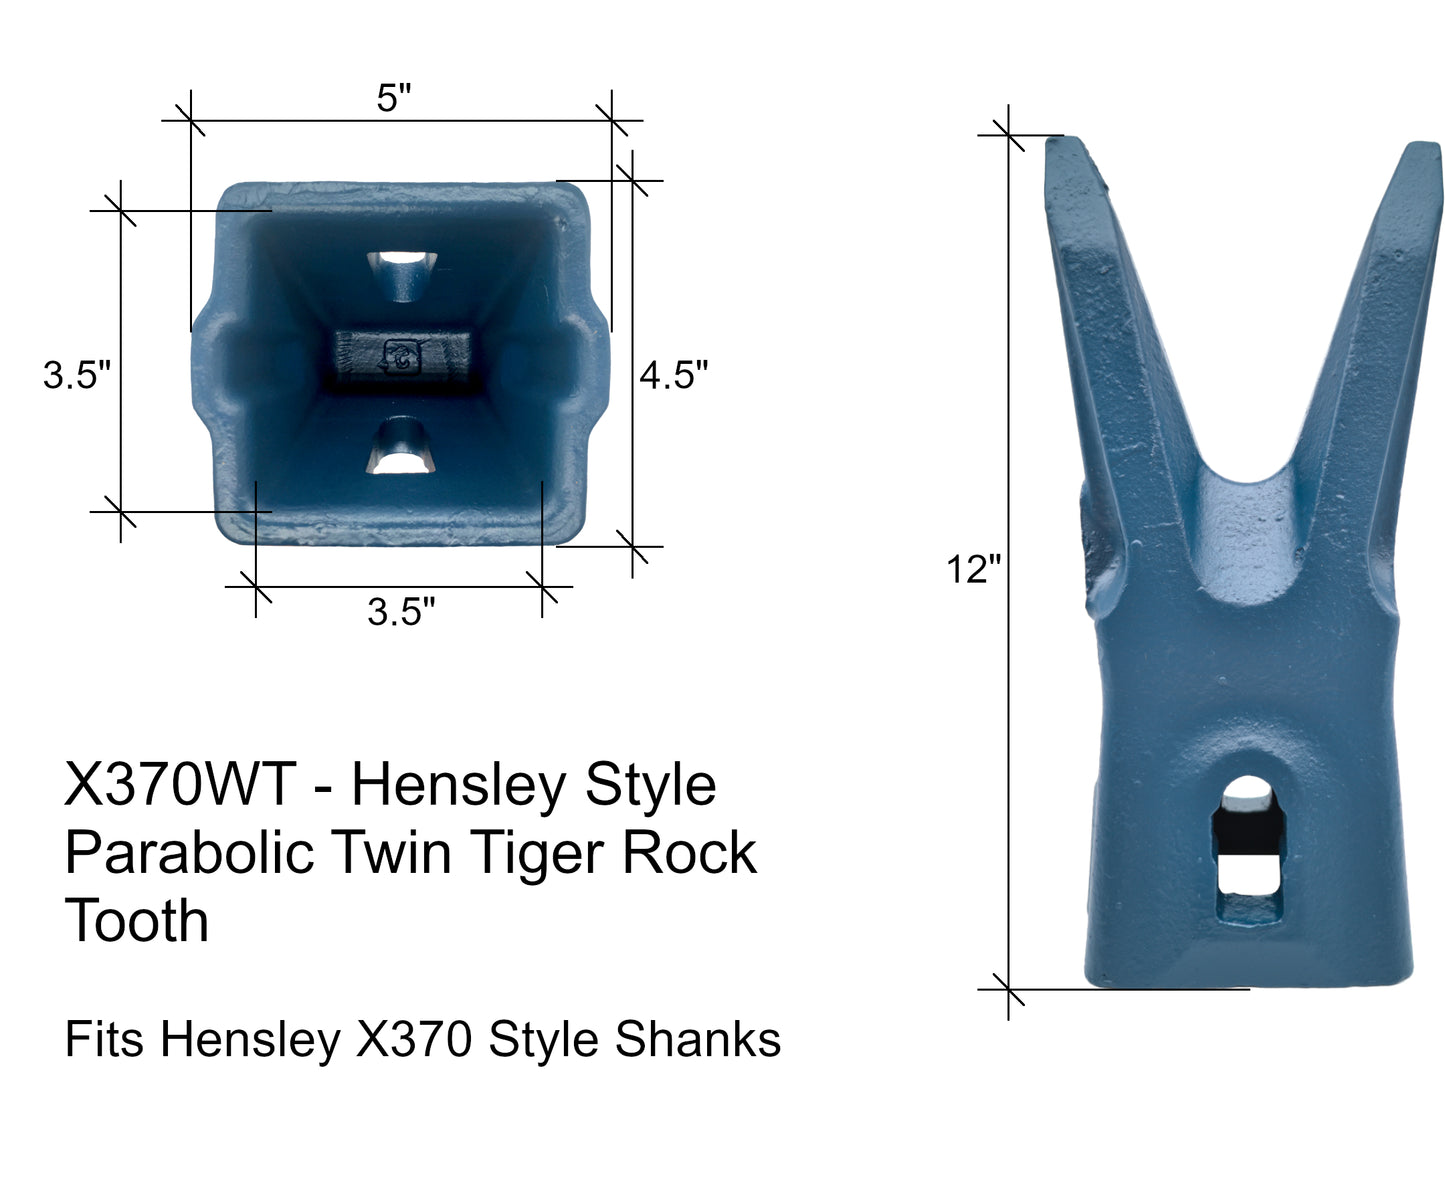 X370WT Twin Tiger Rock Tooth - 'Hensley X370 Style' for Excavator Buckets